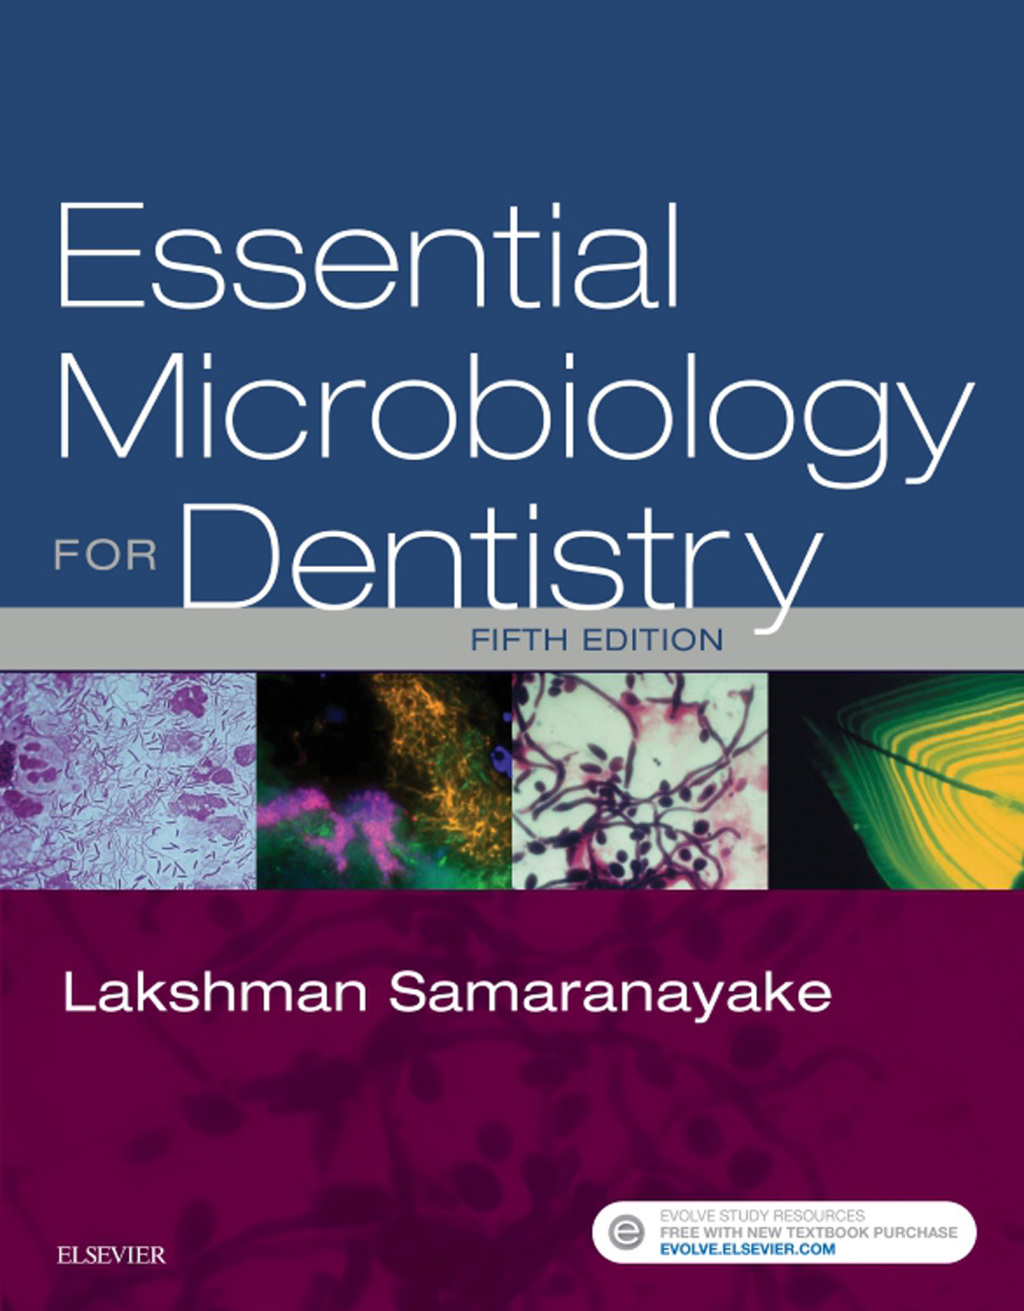 Essential Microbiology for Dentistry - 5th Edition (eBook)